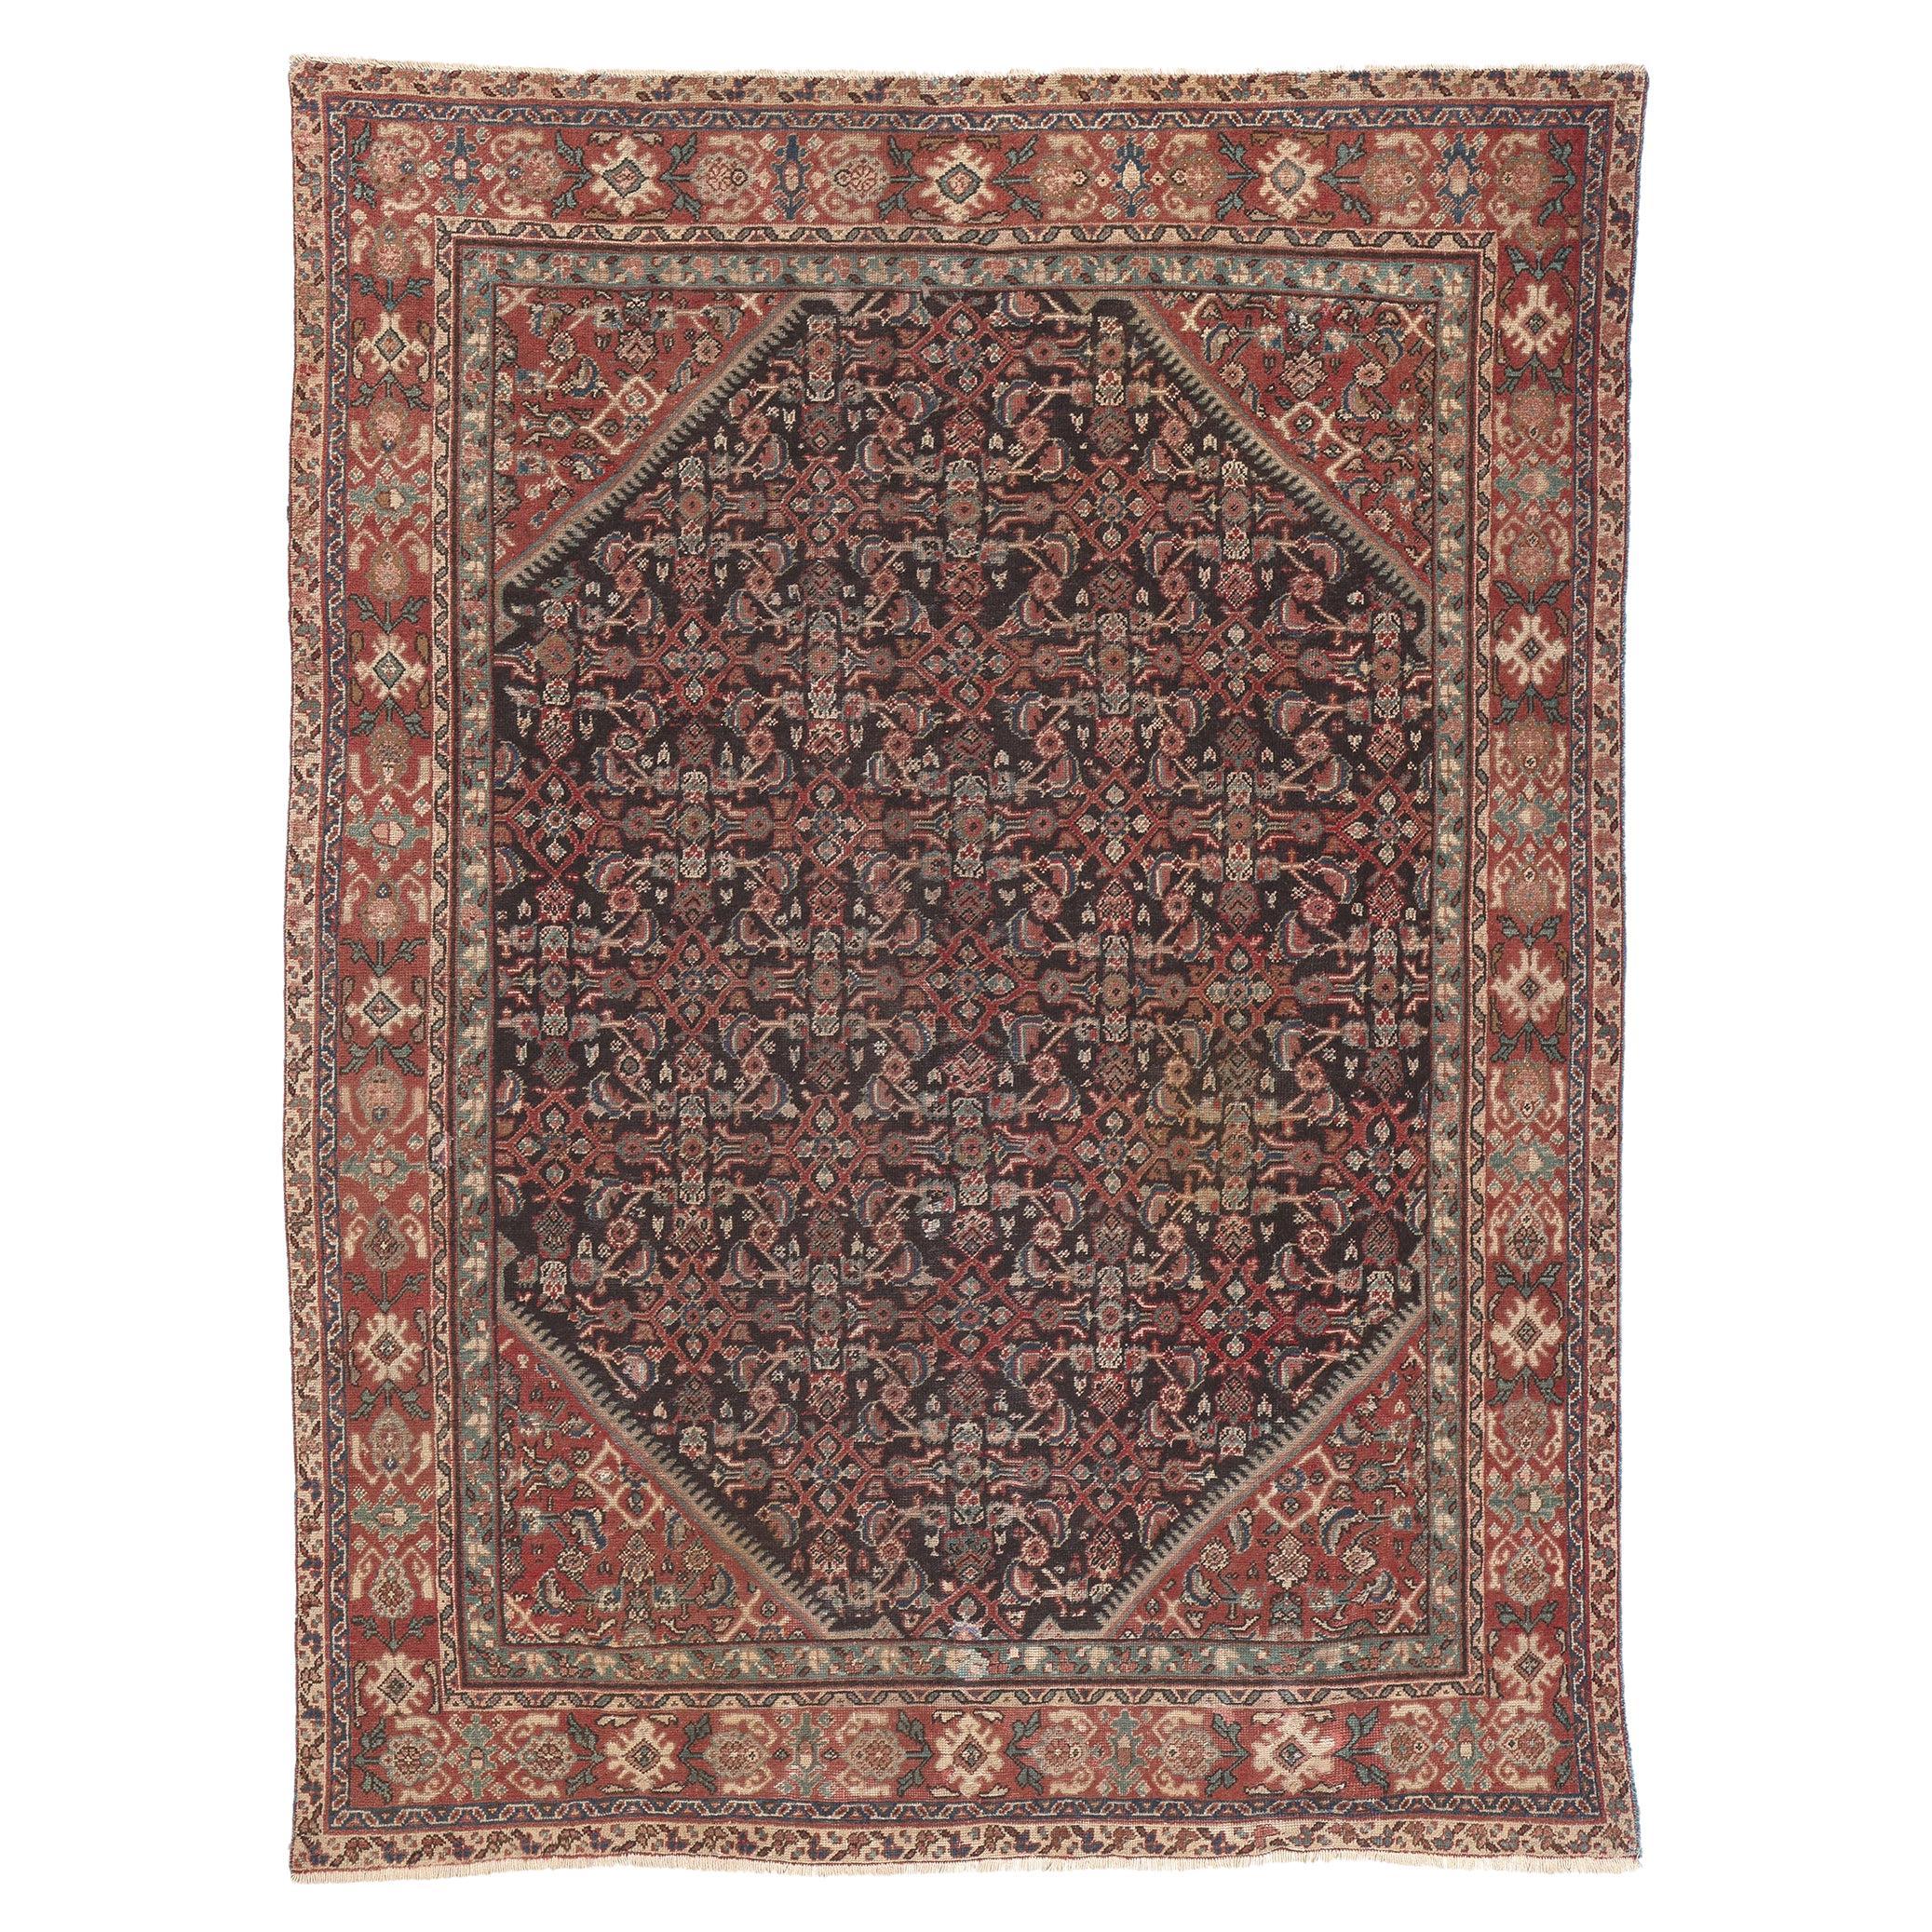 Antique-Worn Persian Mahal Rug, Traditional Sensibility Meets Rustic Charm For Sale